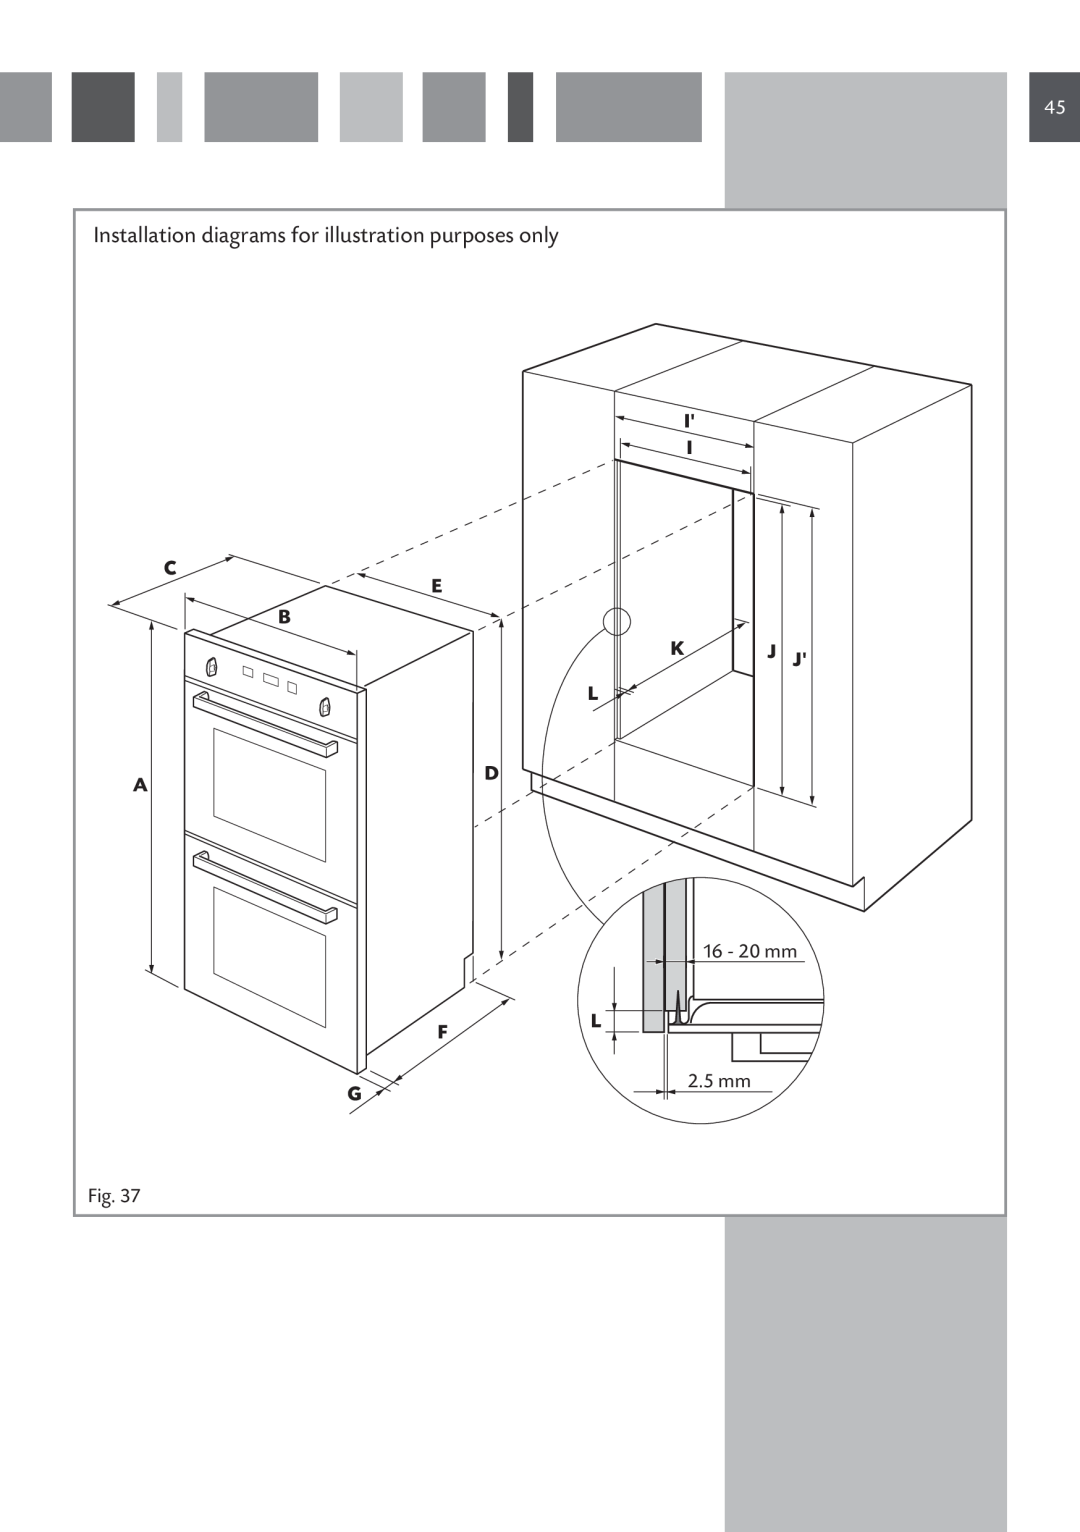 CDA 11Z6 manual Installation diagrams for illustration purposes only, 16 - 20 mm, 2.5 mm 